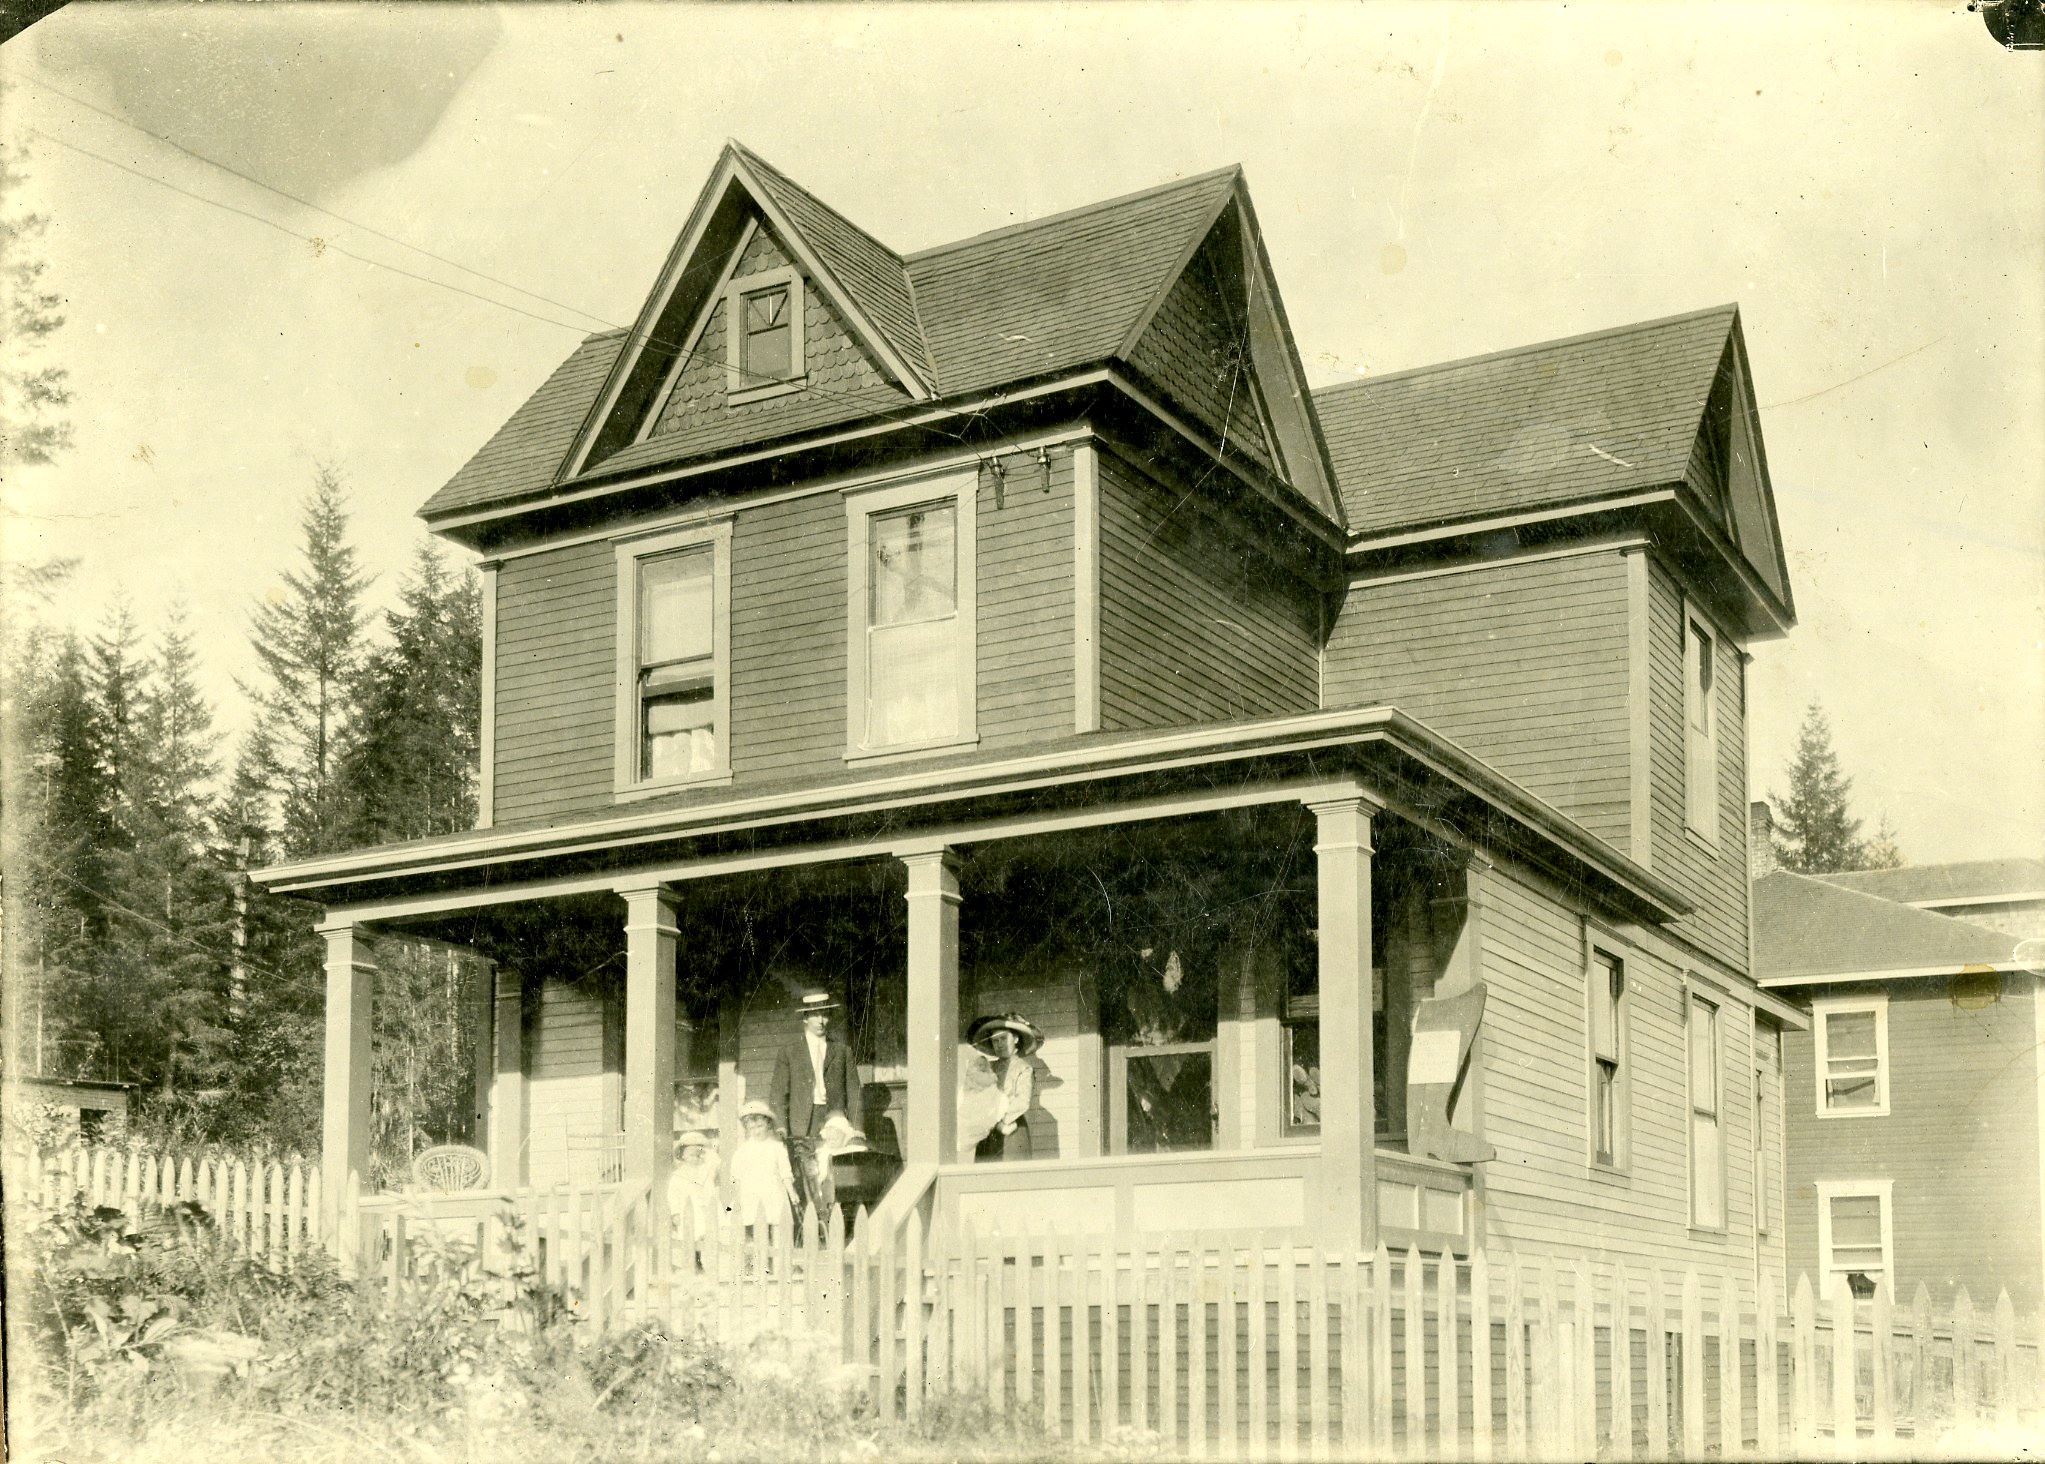 1 - MH_2011_3_31_Bedard_and_Boivin_House_311_Laval_St__1913